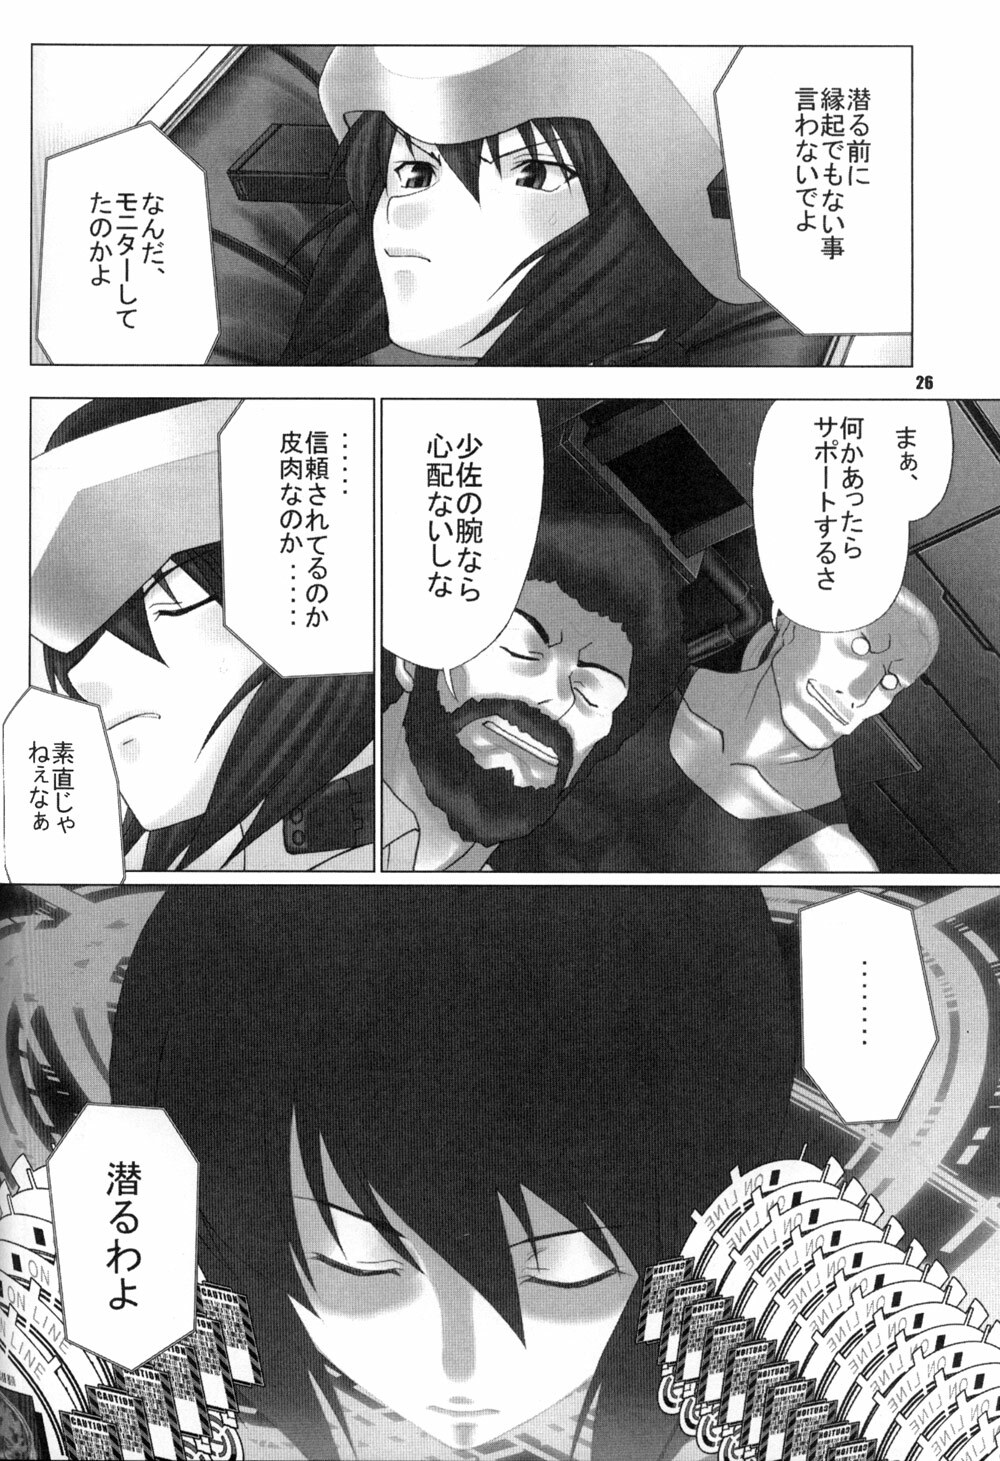 (C66) [Runners High (Chiba Toshirou)] CELLULOID - ACME (Ghost in the Shell) page 26 full